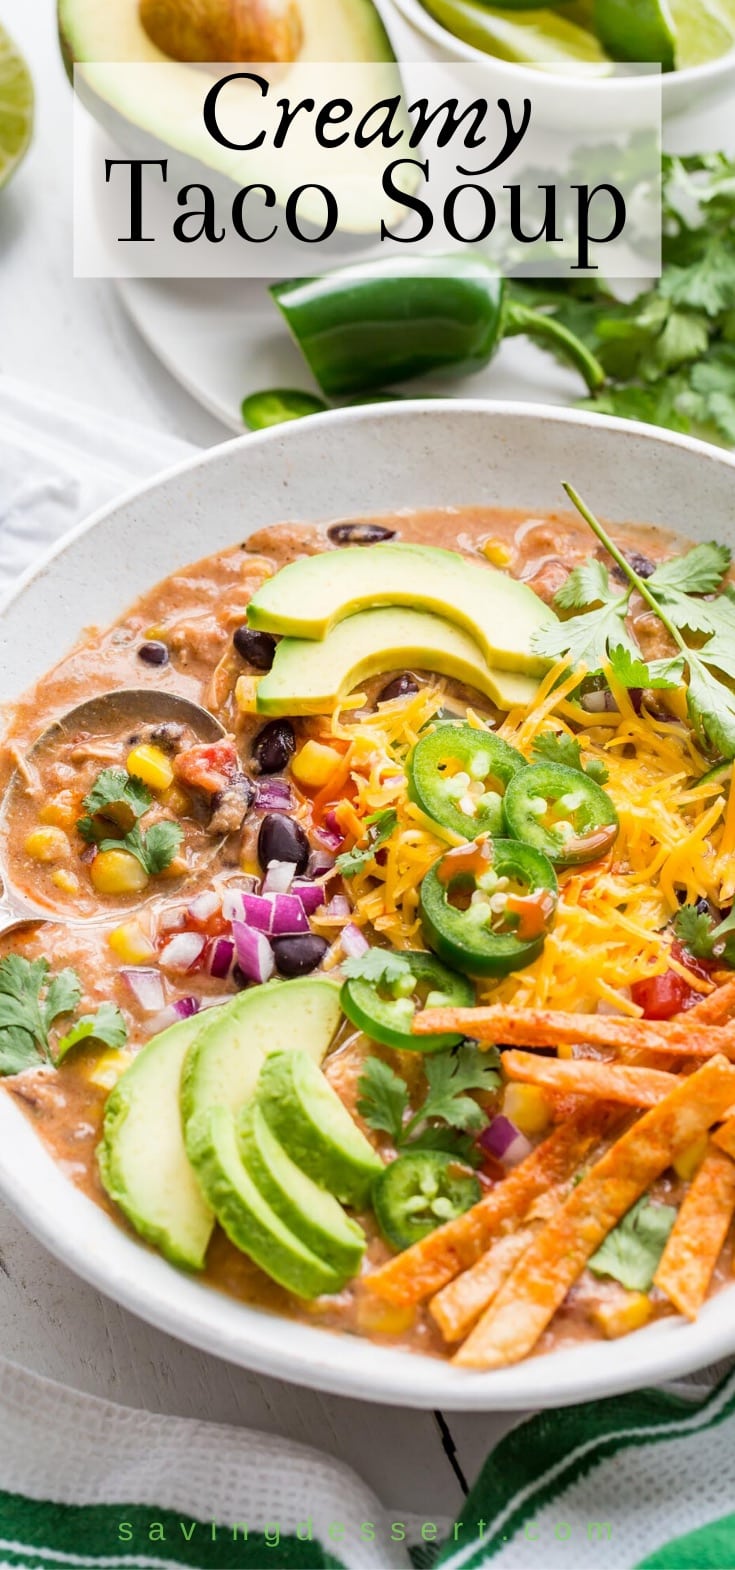 A bowl of creamy taco soup with cheese, chips, avocado and jalapeños